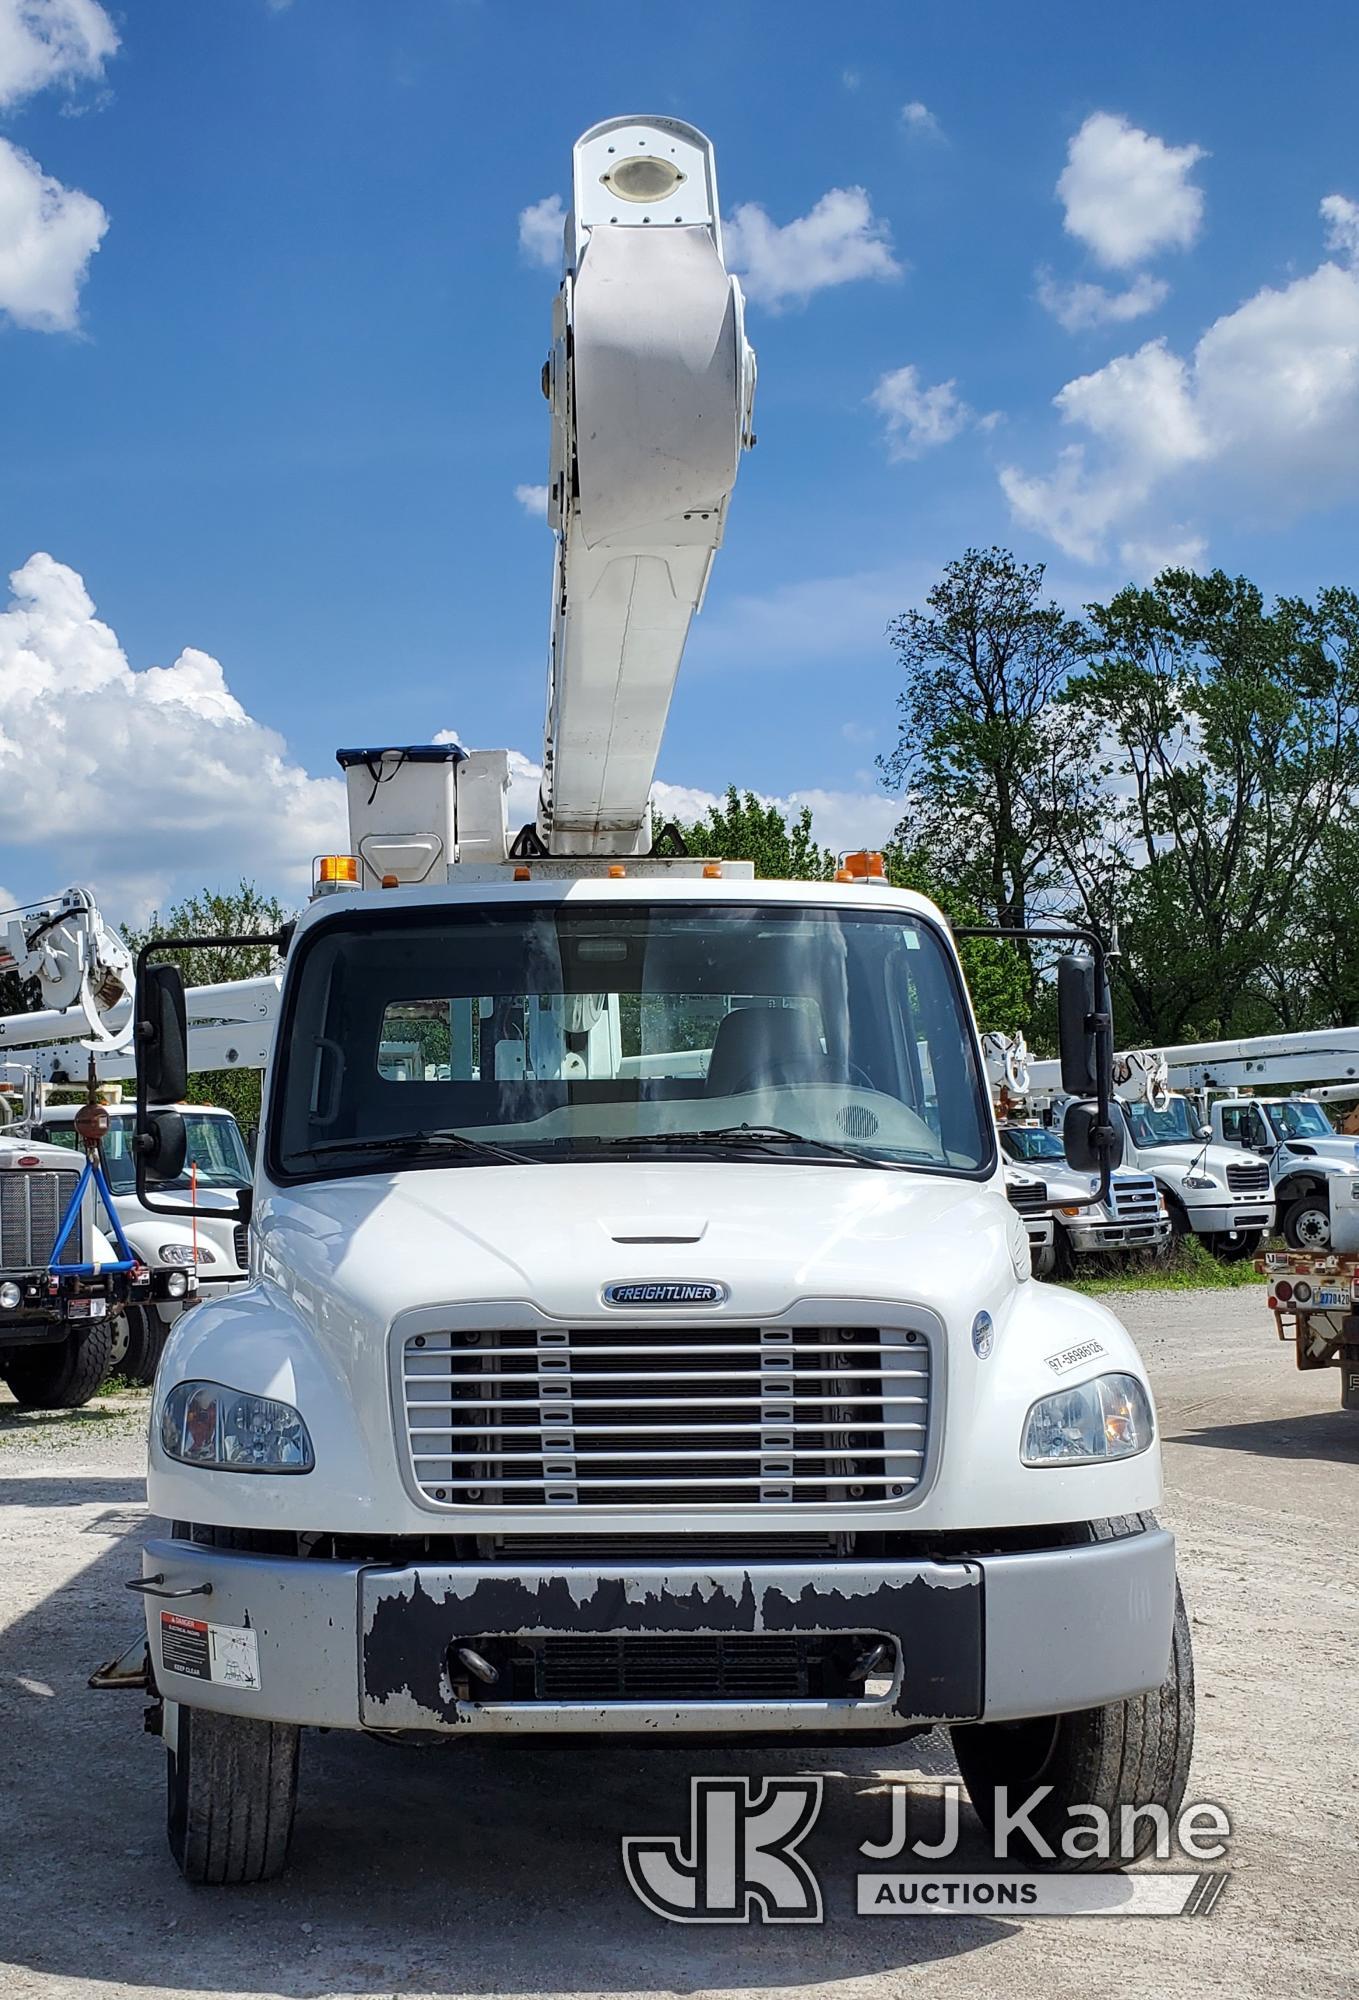 (Indianapolis, IN) Altec AA55, Material Handling Bucket Truck rear mounted on 2019 Freightliner M2 U